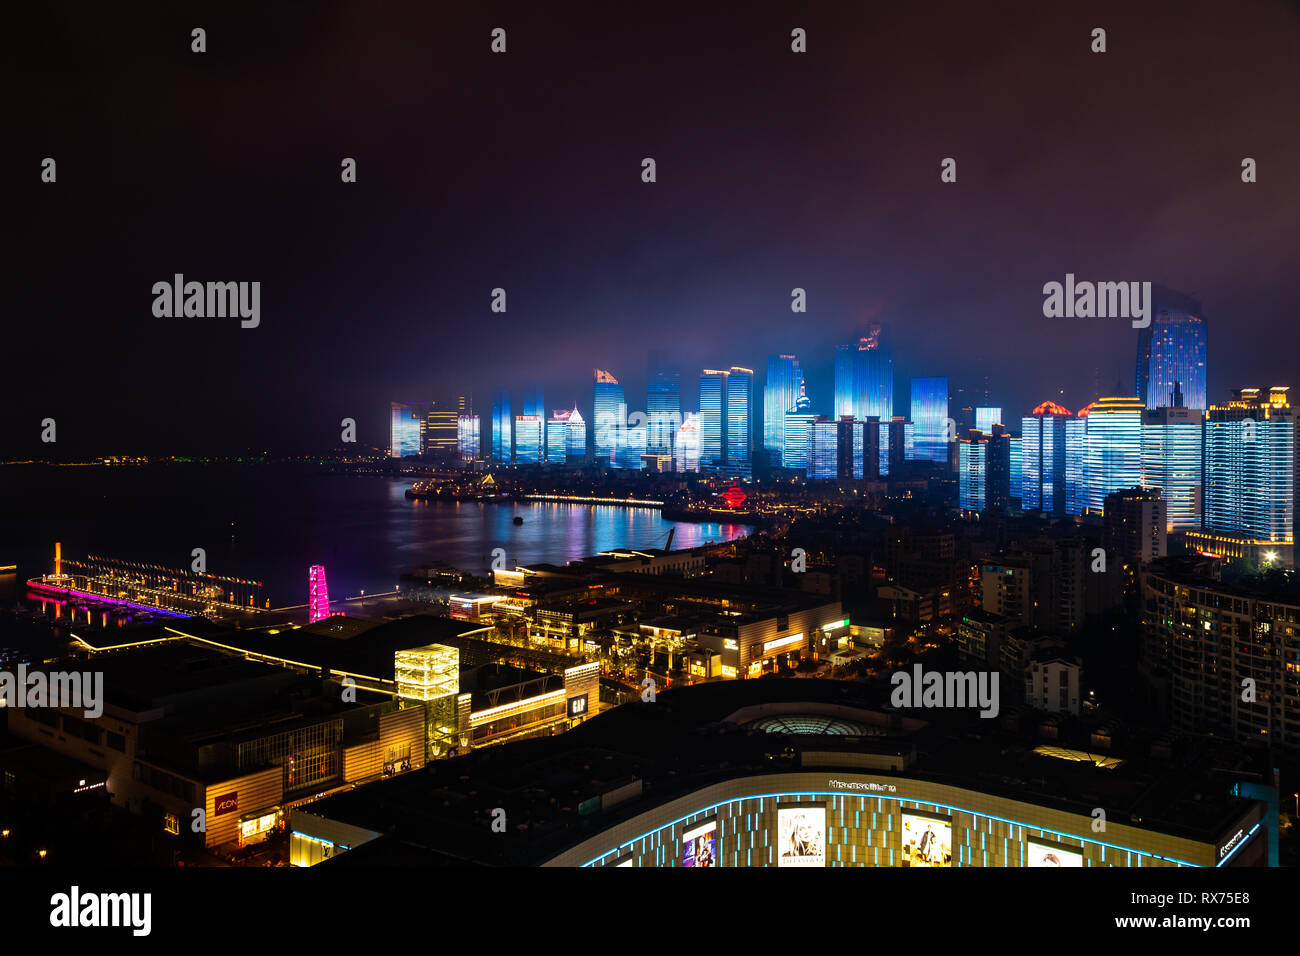 June 2018 - Qingdao, China - The new lightshow of Qingdao skyline created for the SCO summit between China and Russia of June 2018 behind 4th may squa Stock Photo